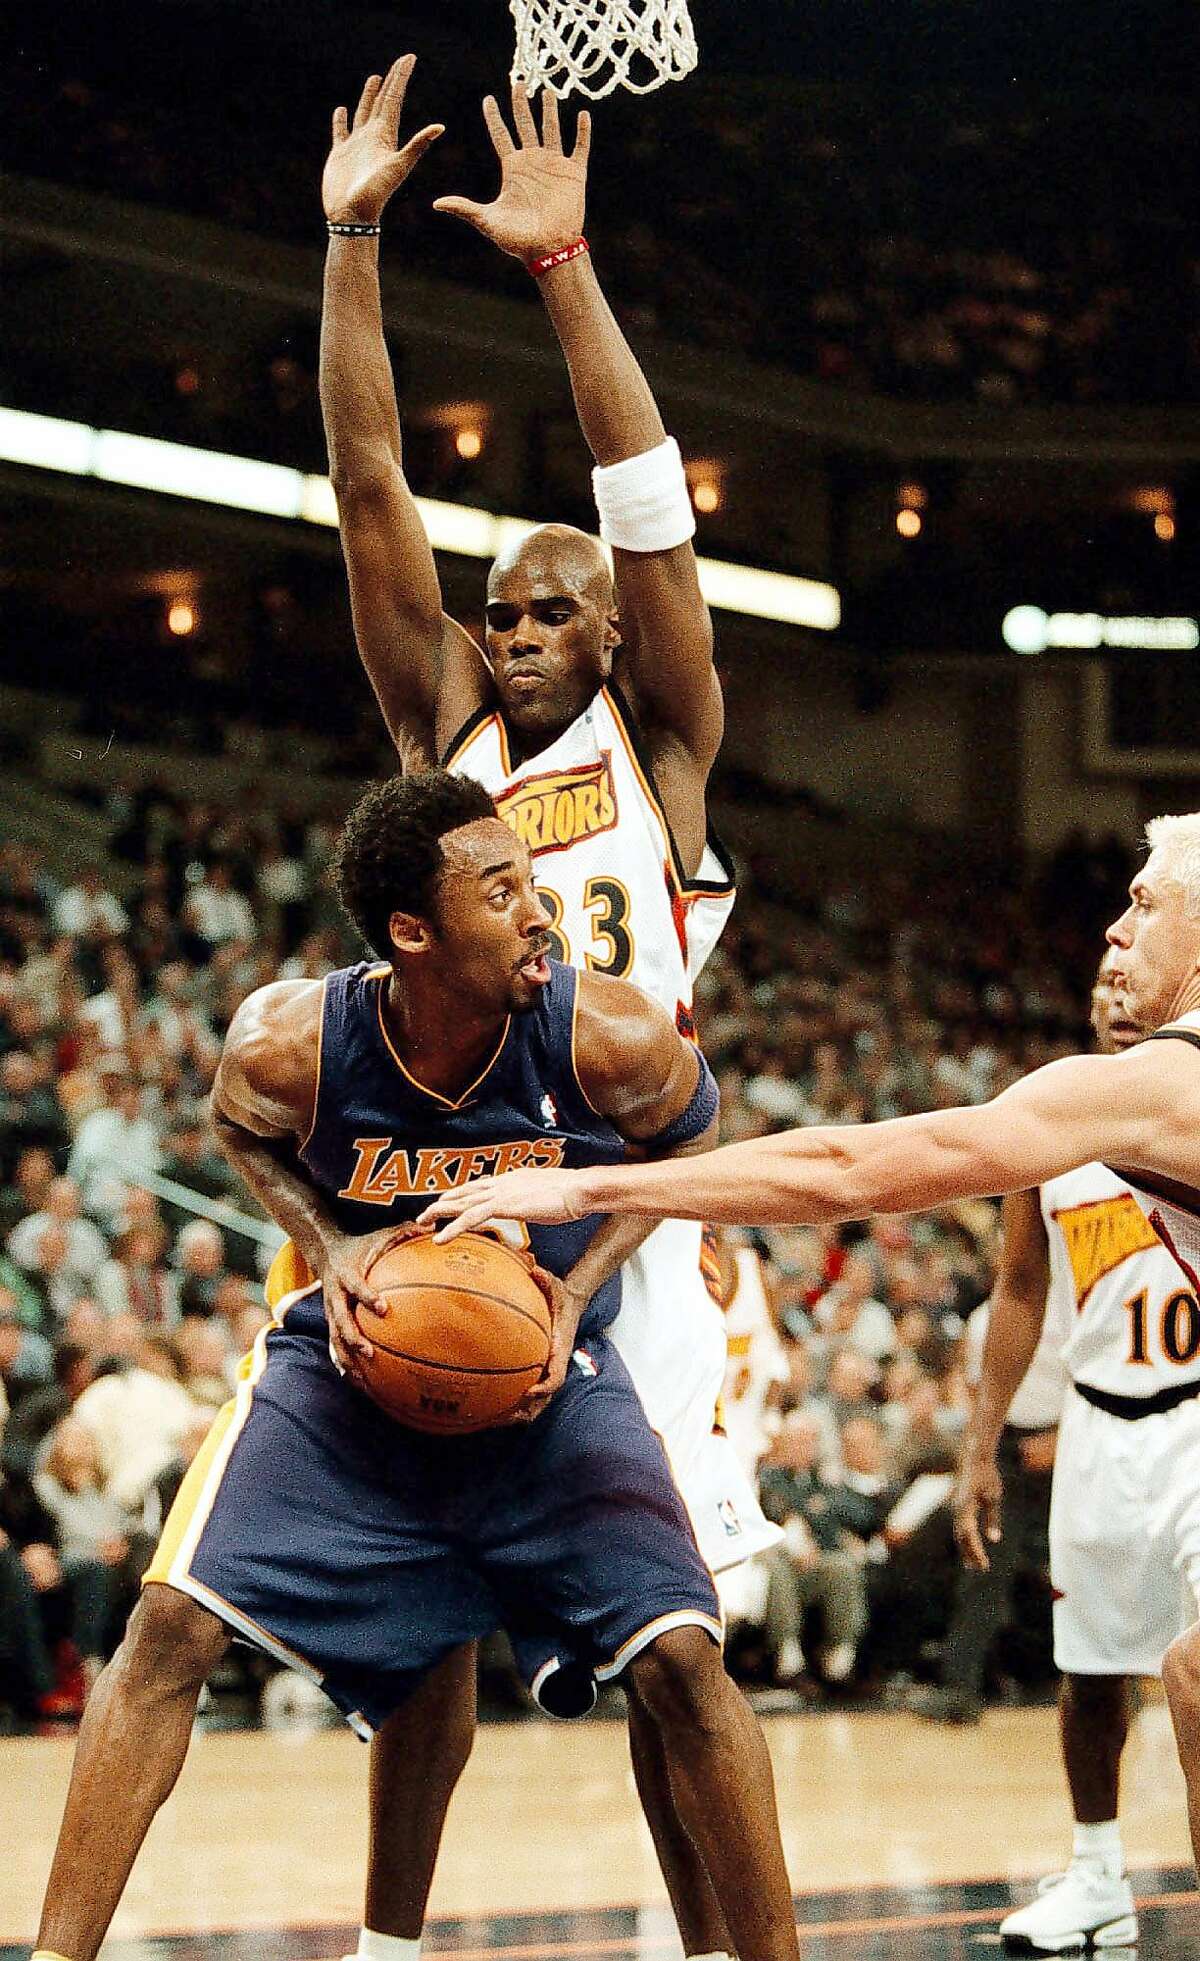 Los Angeles Lakers Kobe Bryant, front, looks for a passing lane through Golden State Warriors defenders Antawn Jamison, top, and Bob Sura, right, during the first period Wednesday, Dec. 6, 2000 in Oakland, Calif. Bryant and Jamison scored 51 points apiece, the first NBA game since 1962 to feature two 50-point scorers. (AP Photo/Oakland Tribune, D. Ross Cameron)